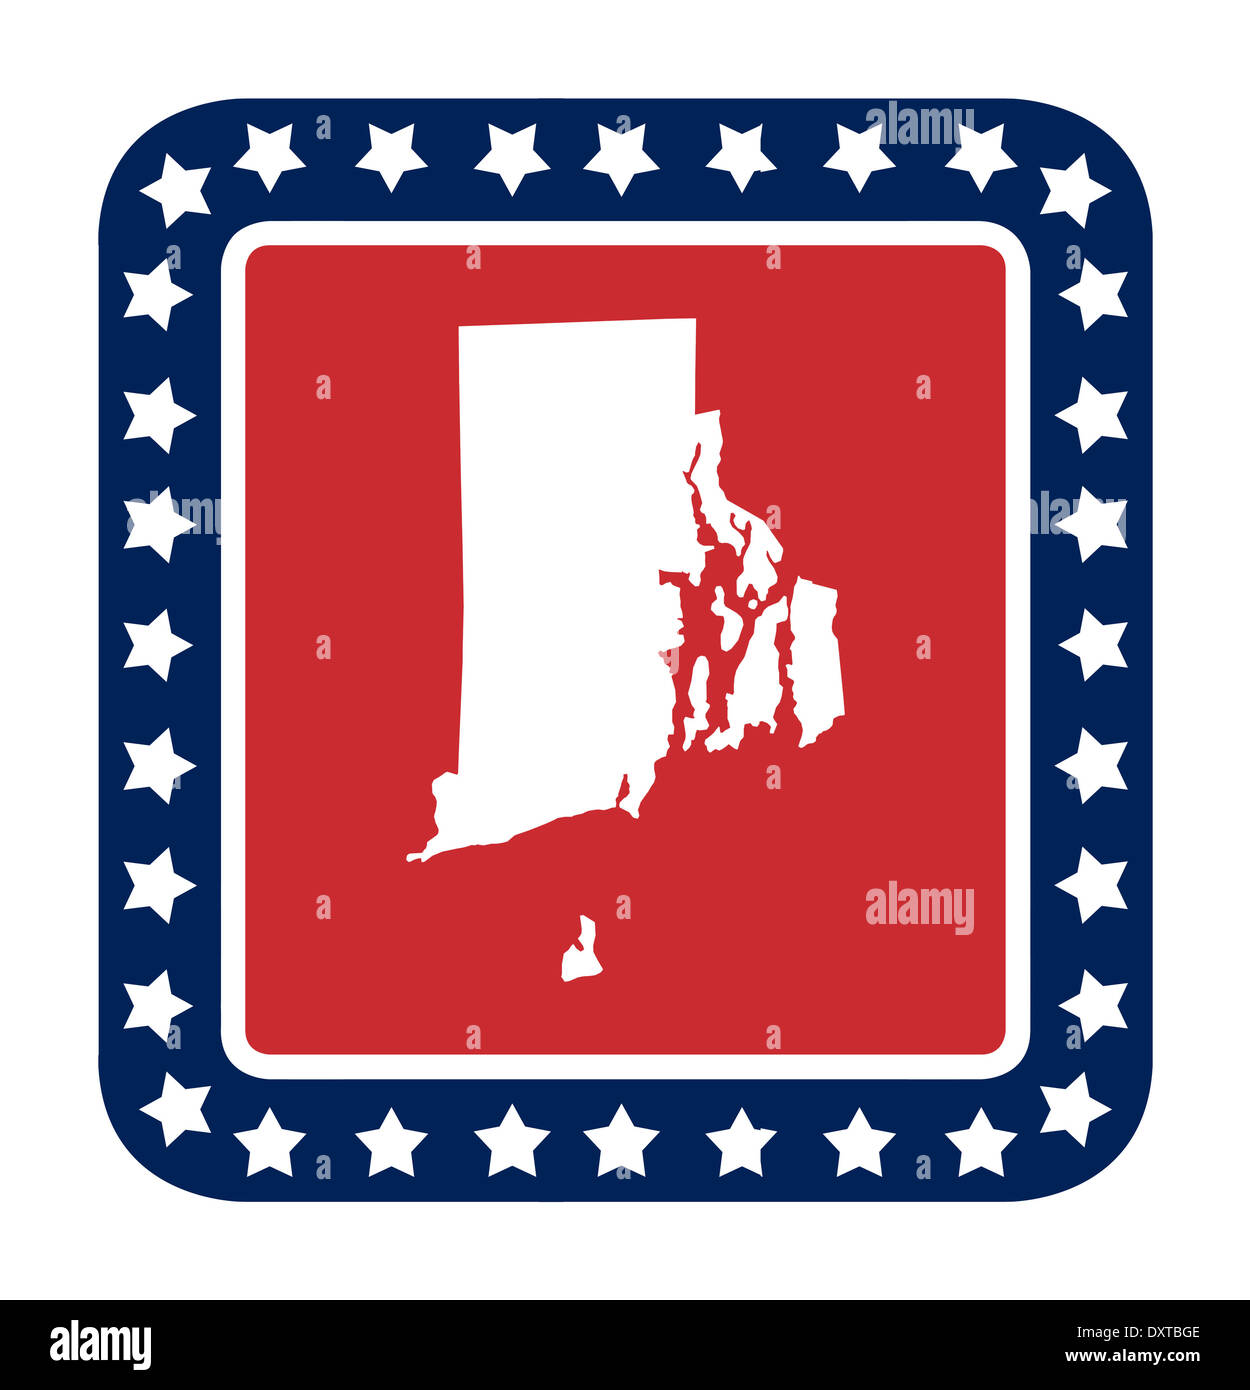 Rhode Island state button on American flag in flat web design style, isolated on white background. Stock Photo